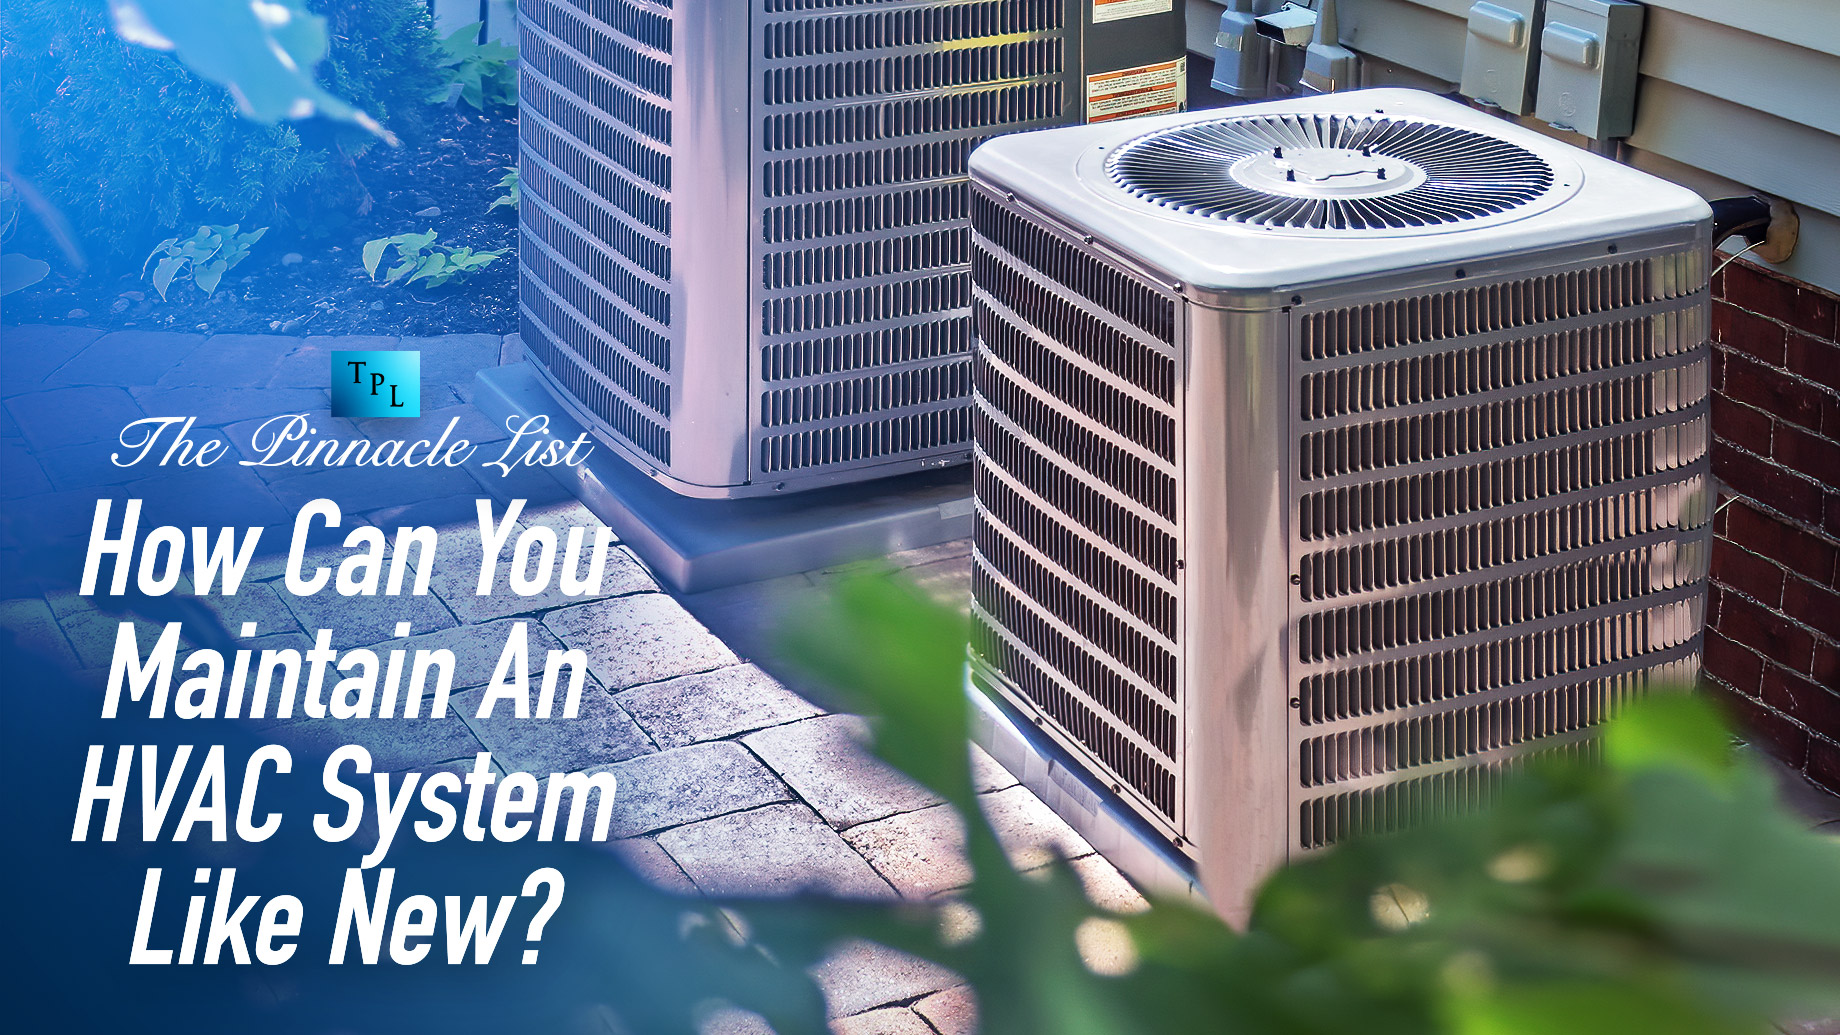 How Can You Maintain An HVAC System Like New?